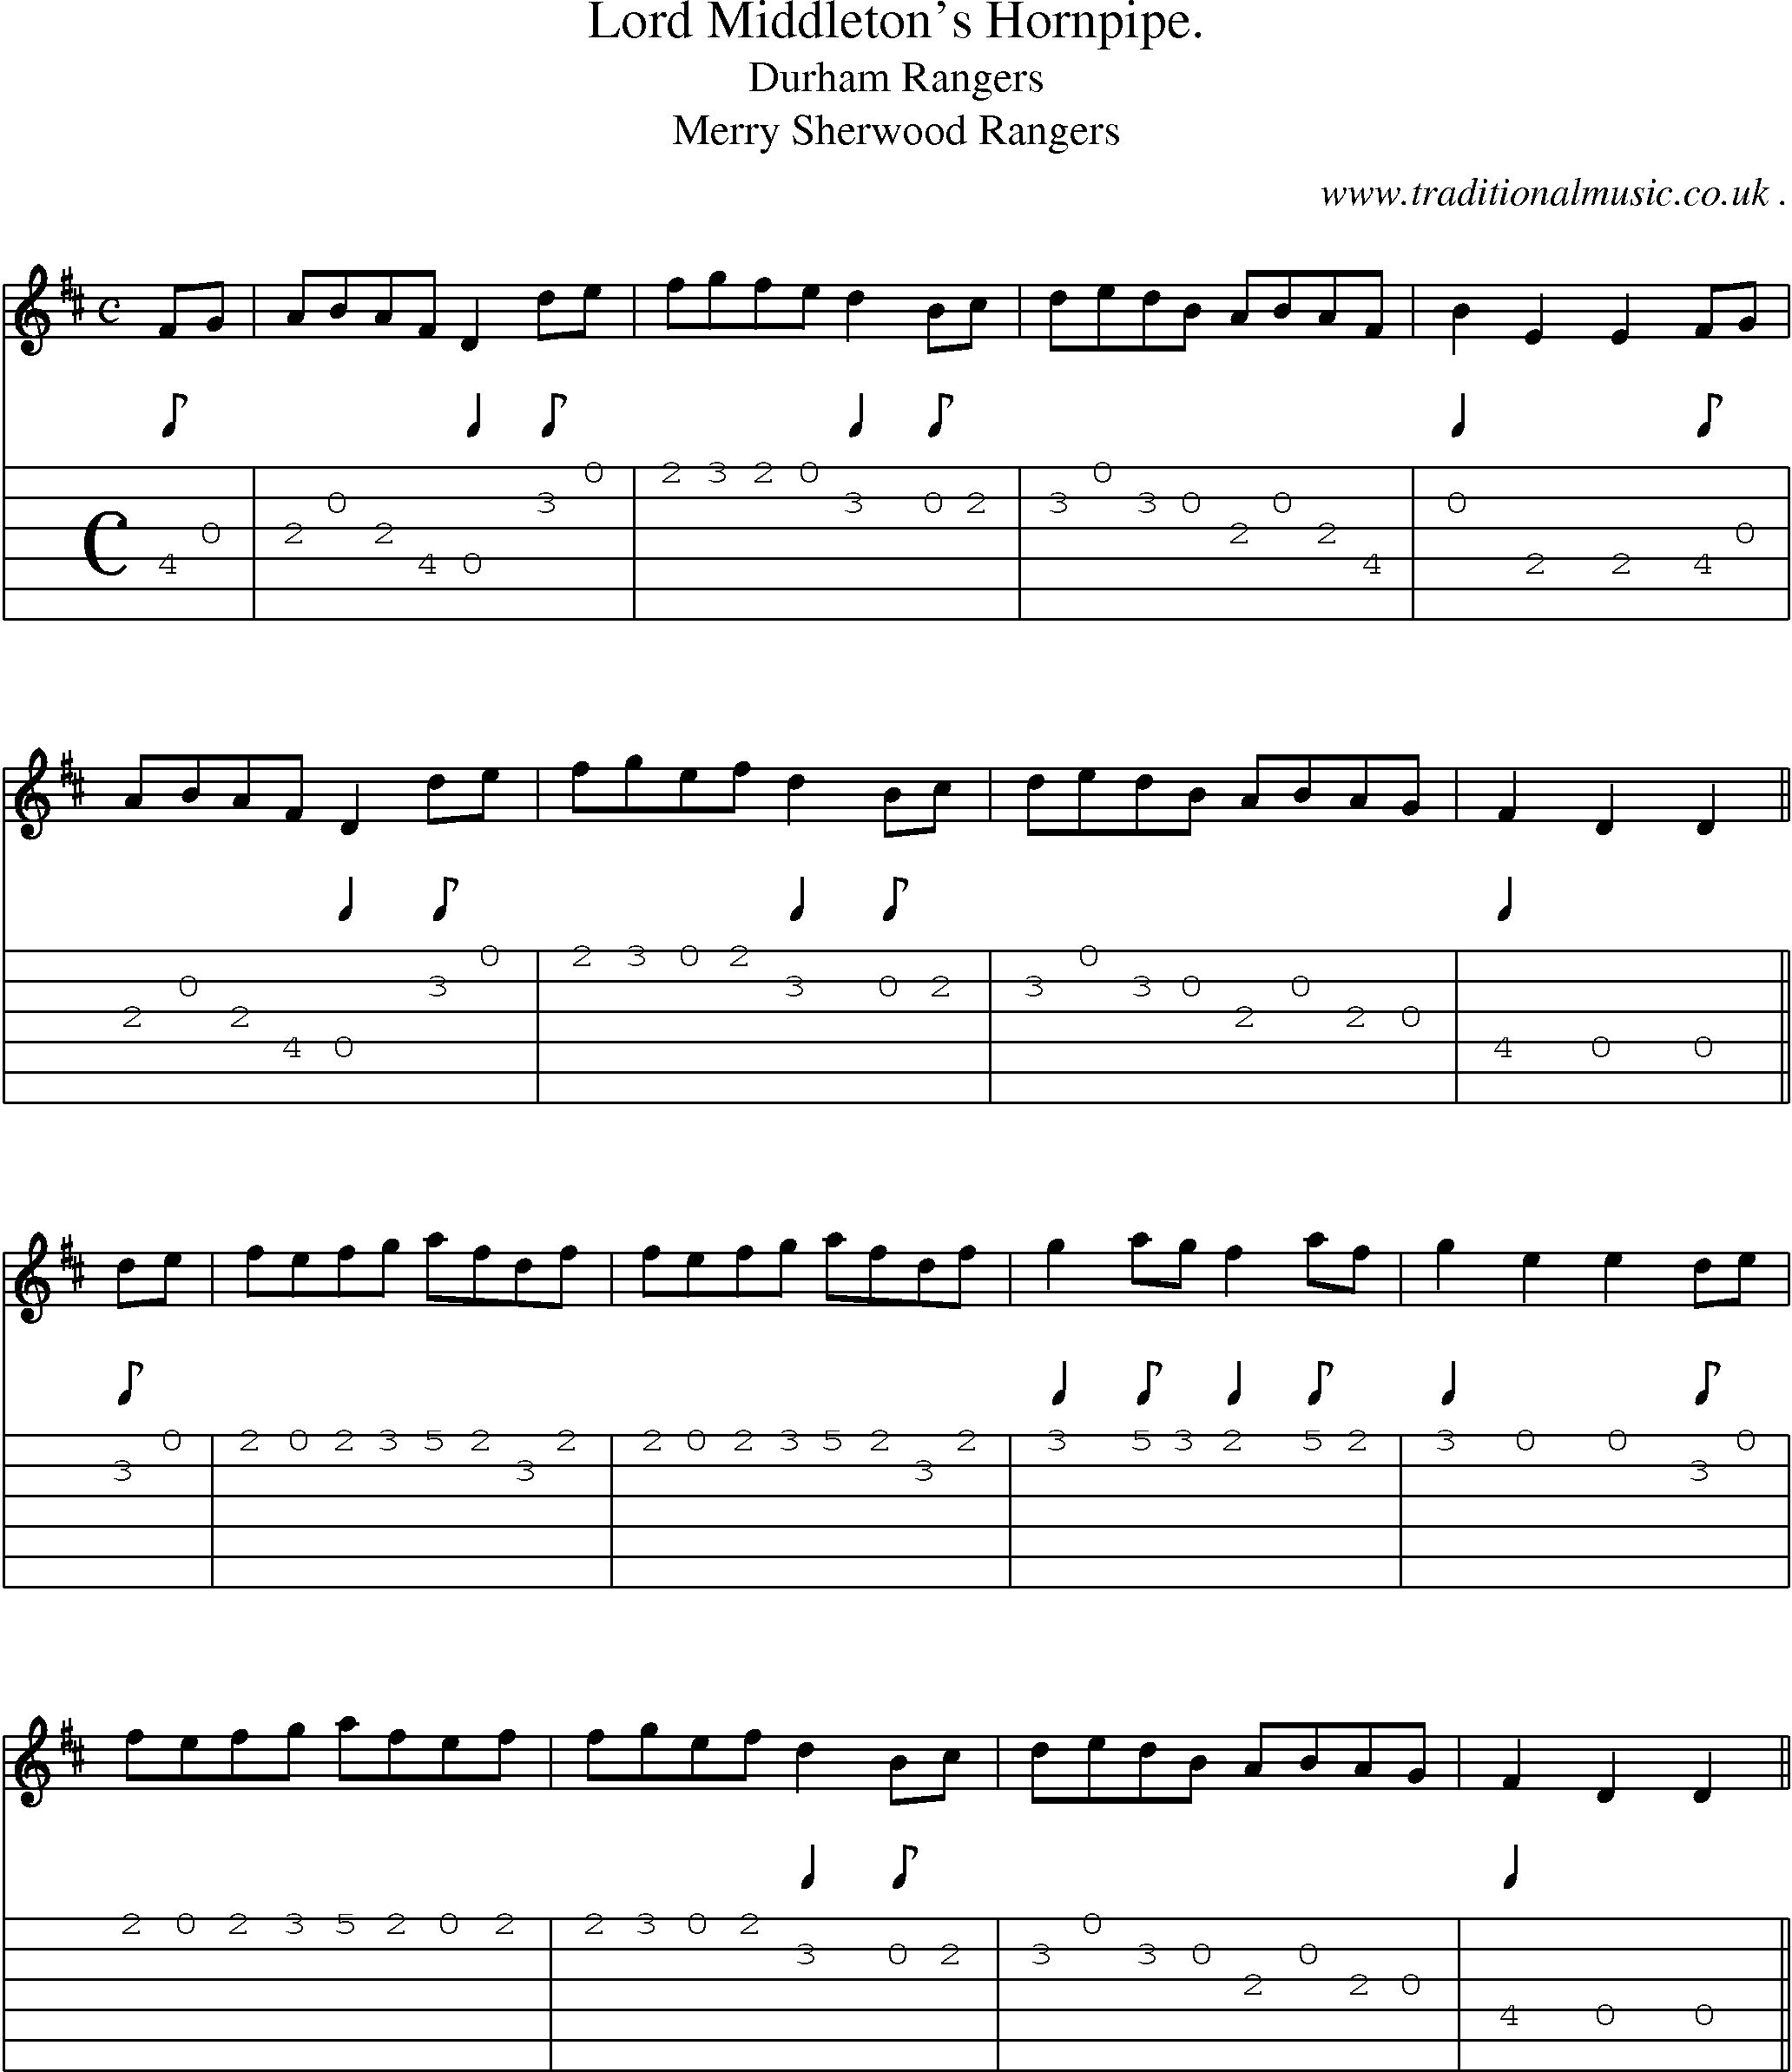 Sheet-Music and Guitar Tabs for Lord Middletons Hornpipe